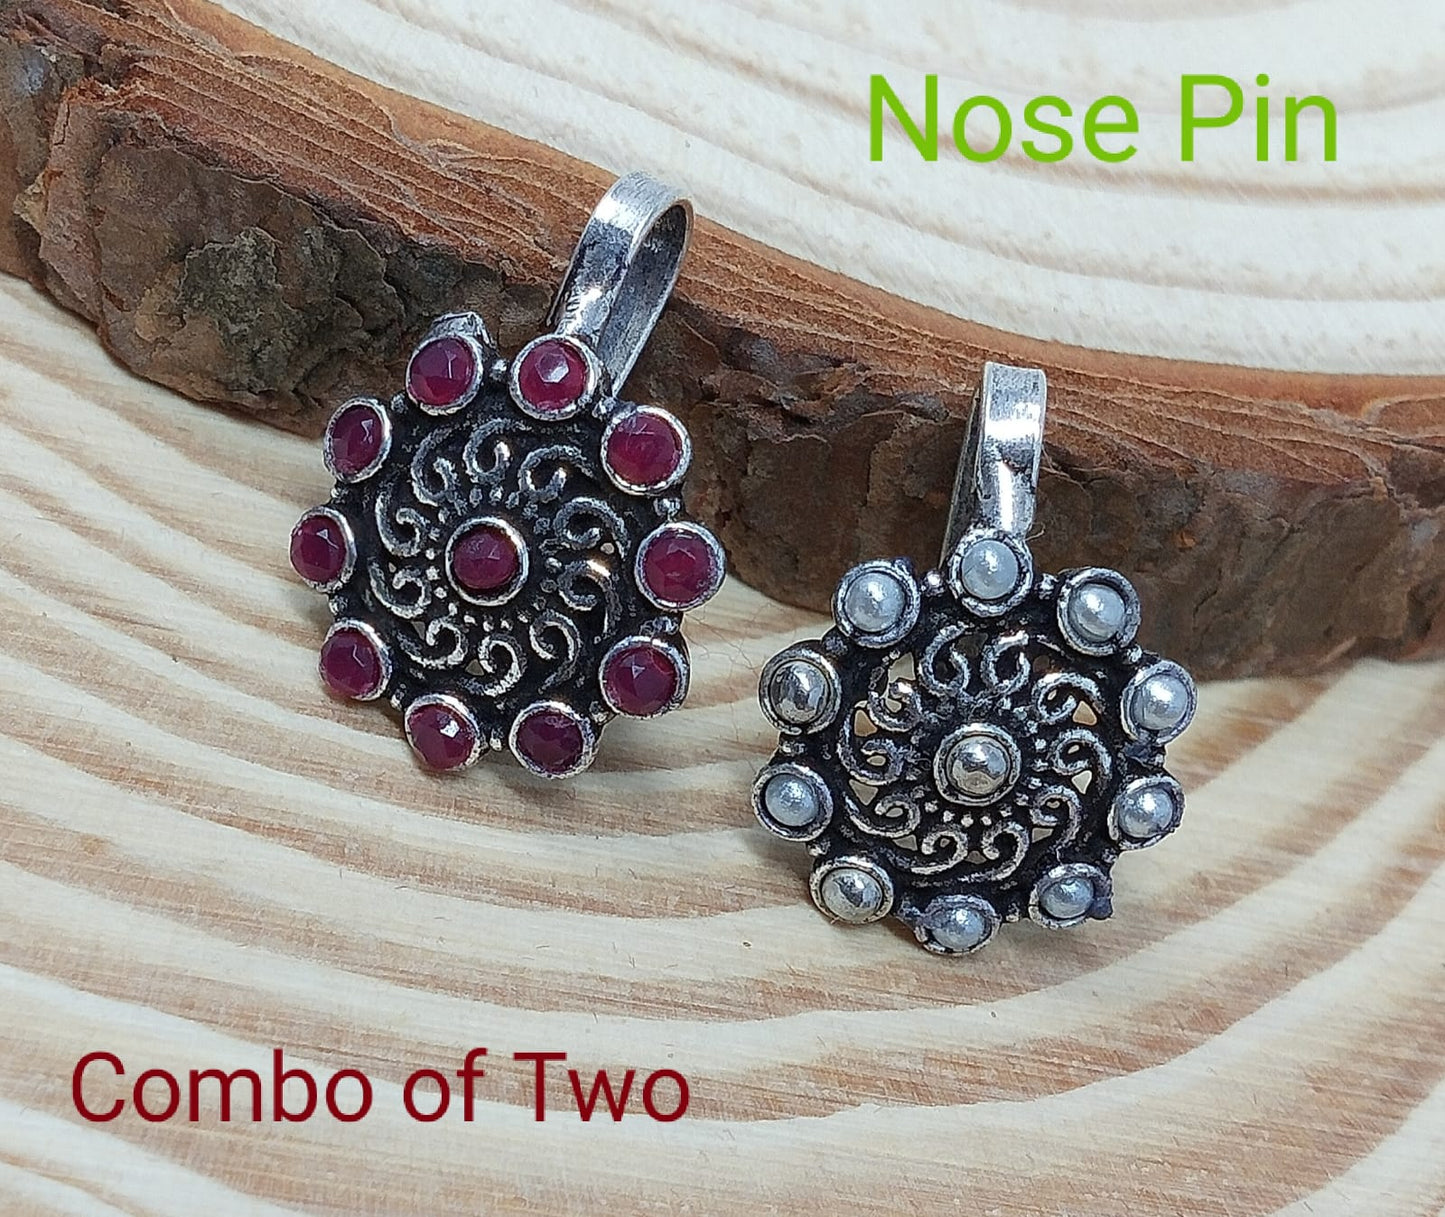 Oxidized Silver Indo Western Fashion Jewellery Nose Pin - Combo of 2